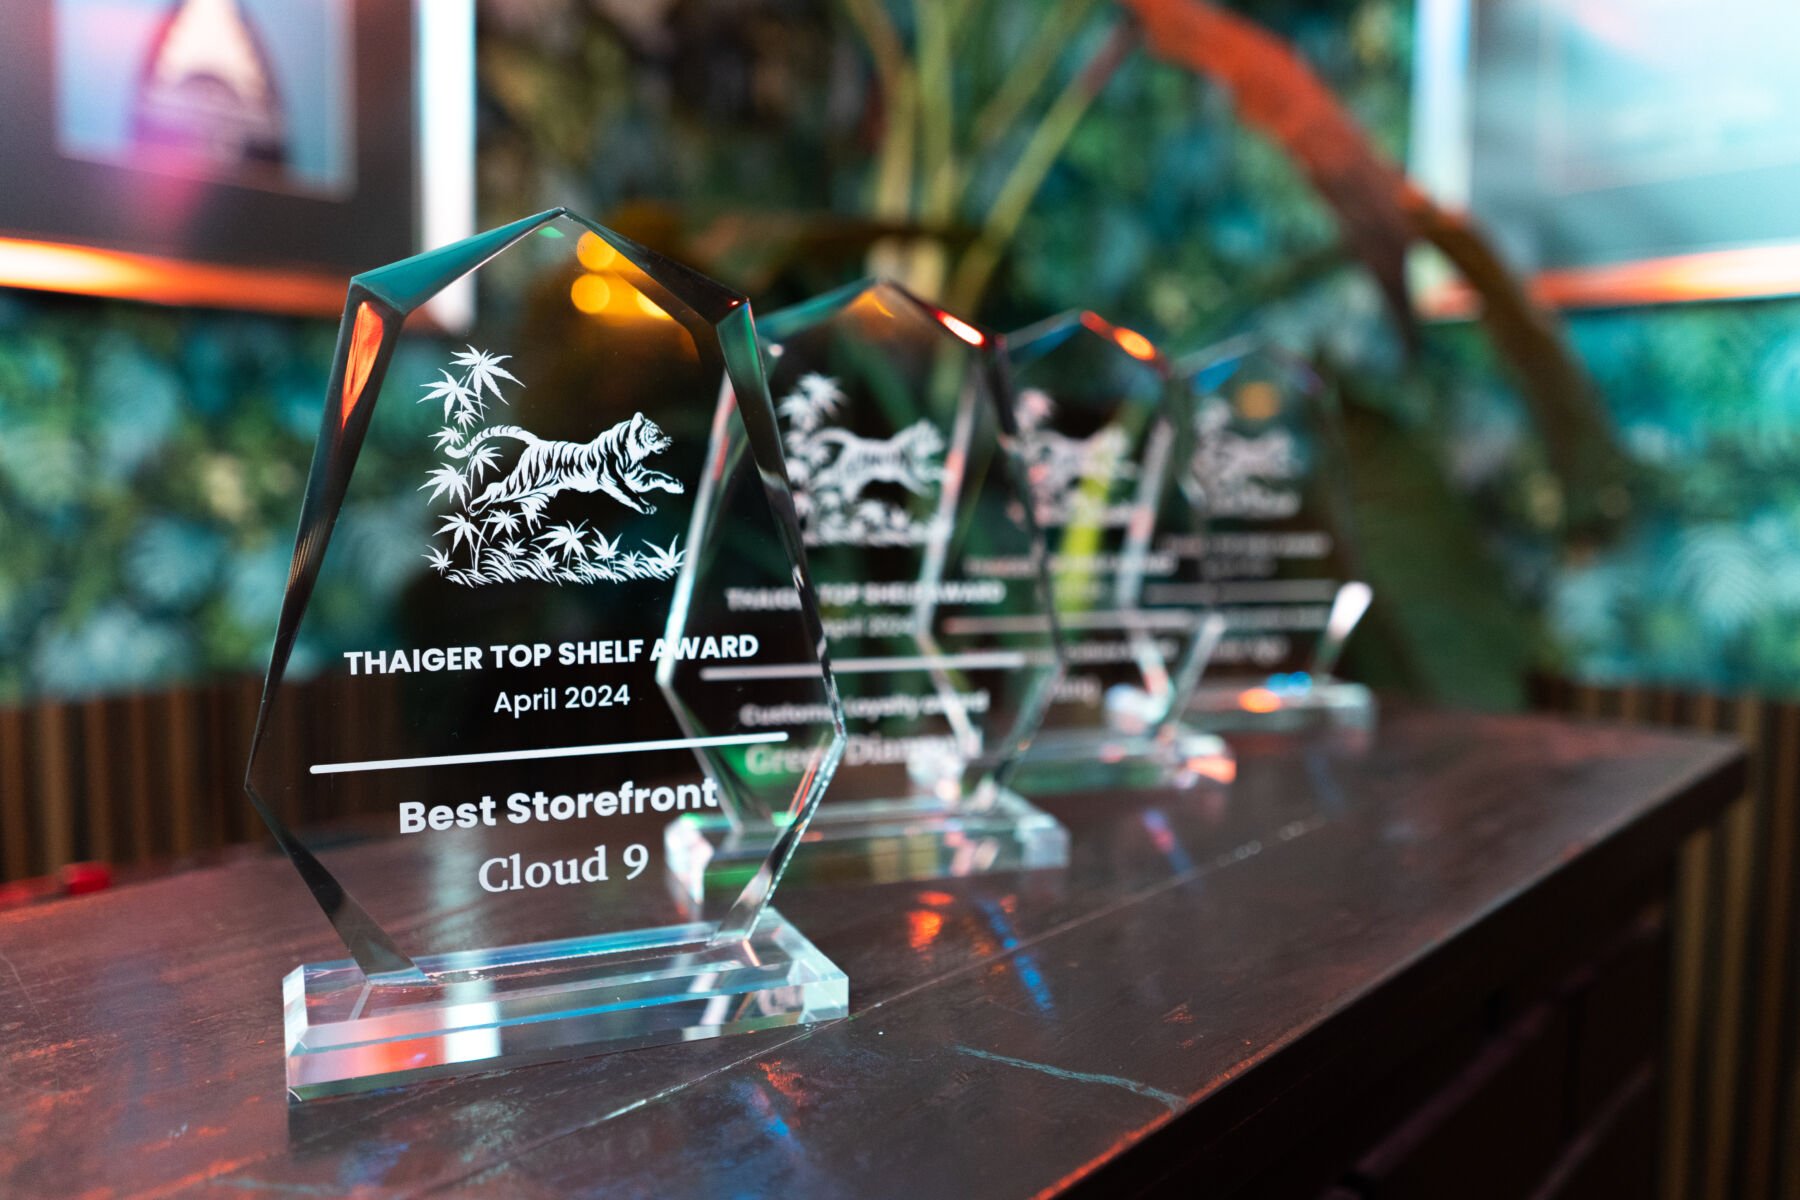 Thaiger Top Shelf Awards celebrates excellence in Thailand’s cannabis industry at LV Cannabis